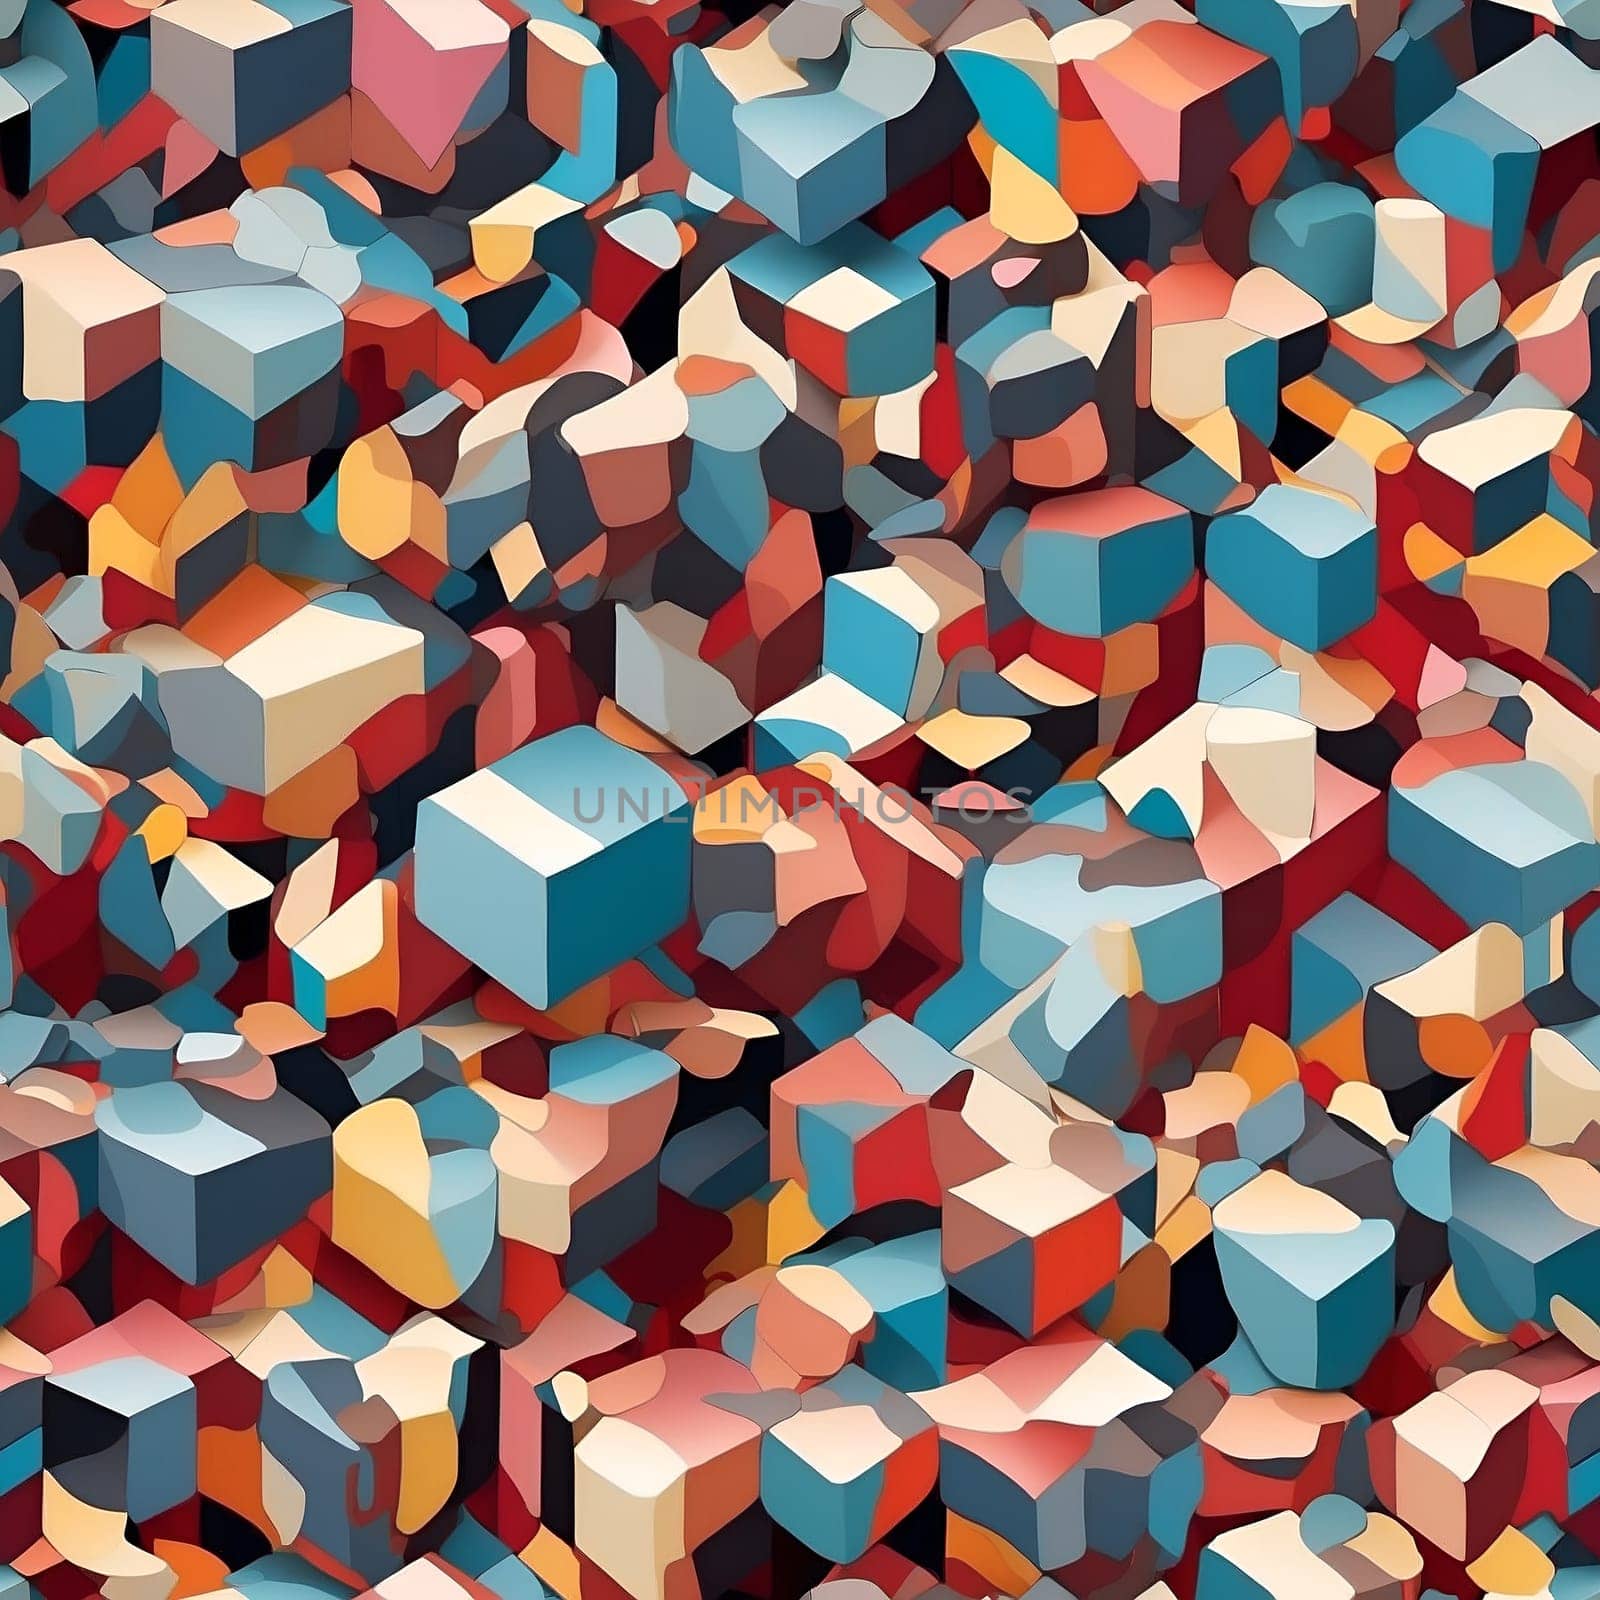 An abstract painting featuring a seamless pattern of numerous differently colored cubes.